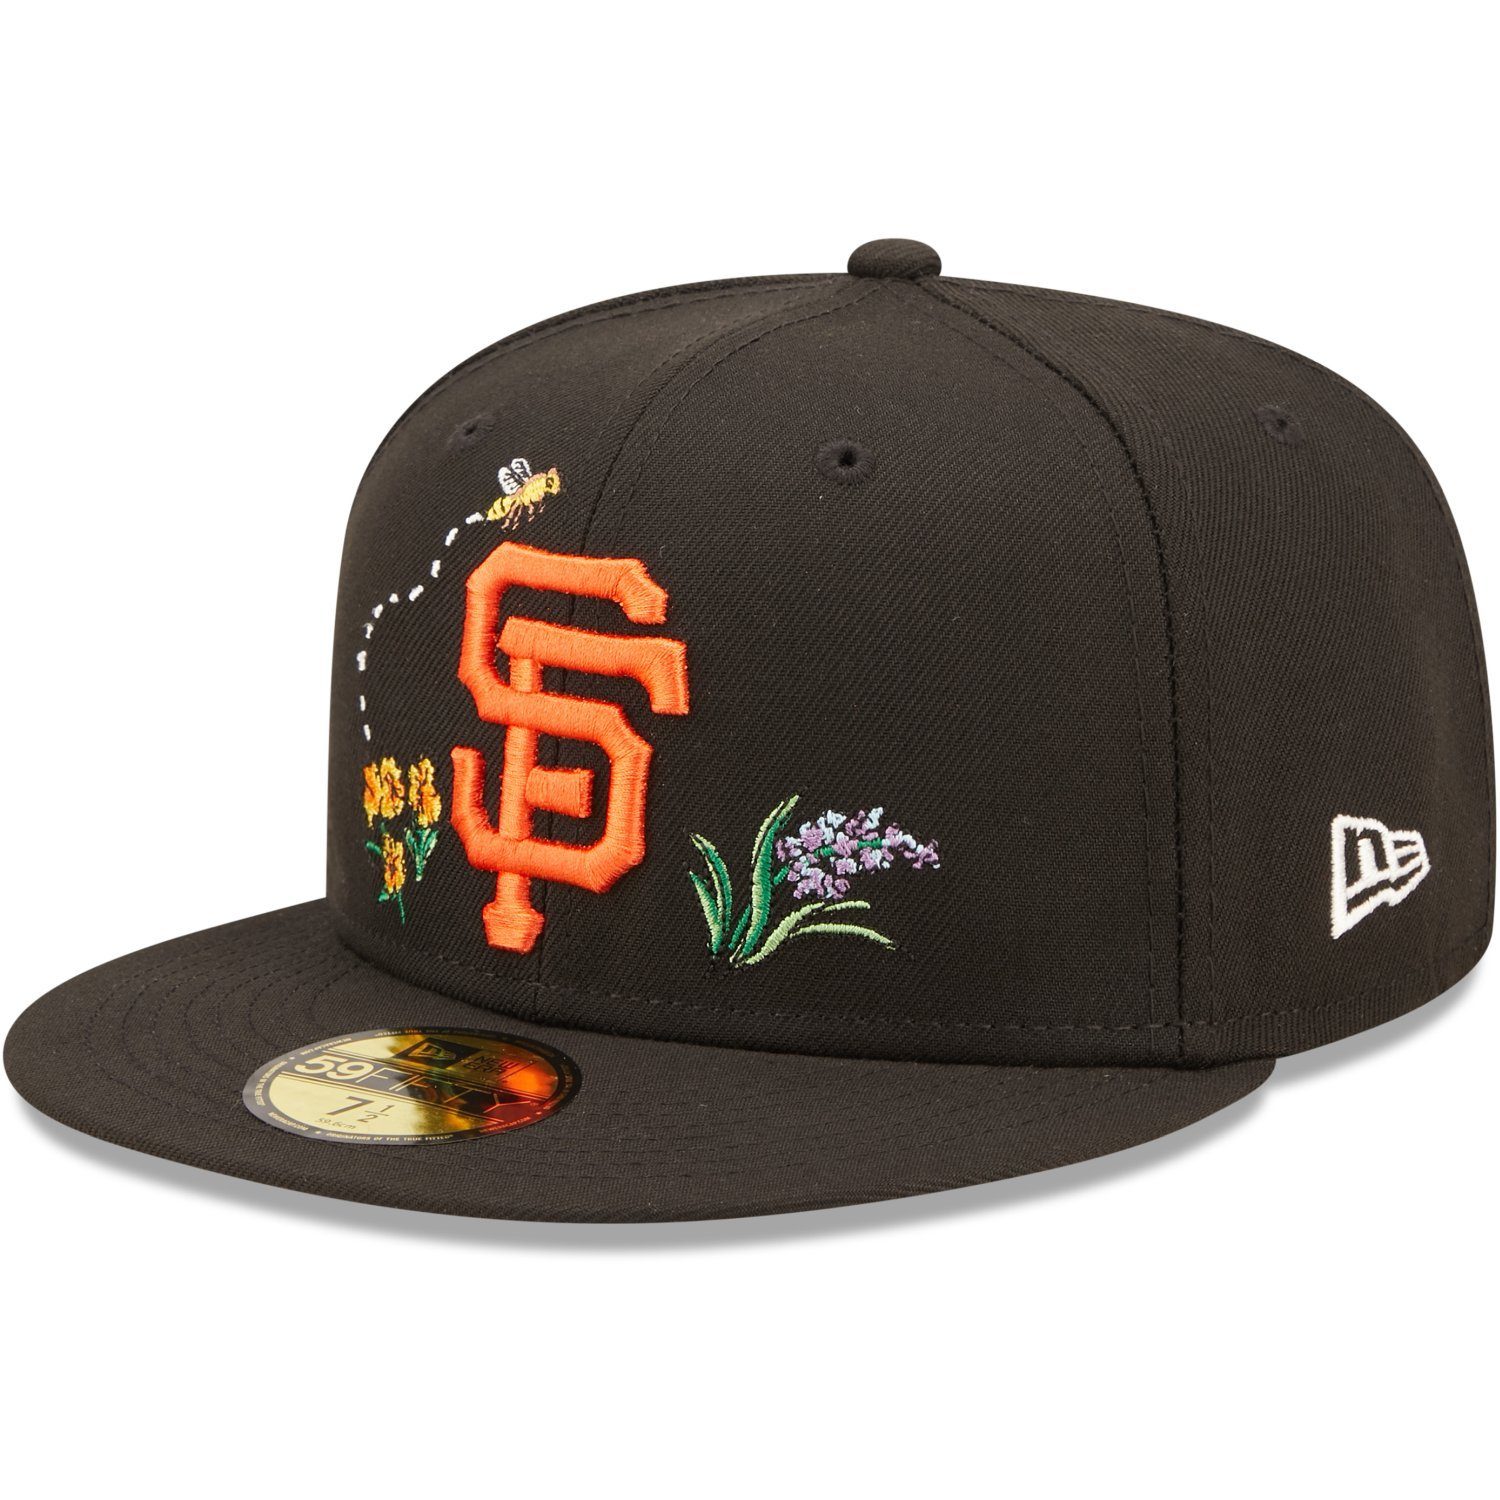 New Era Fitted Cap 59Fifty WATER FLORAL San Francisco Giants